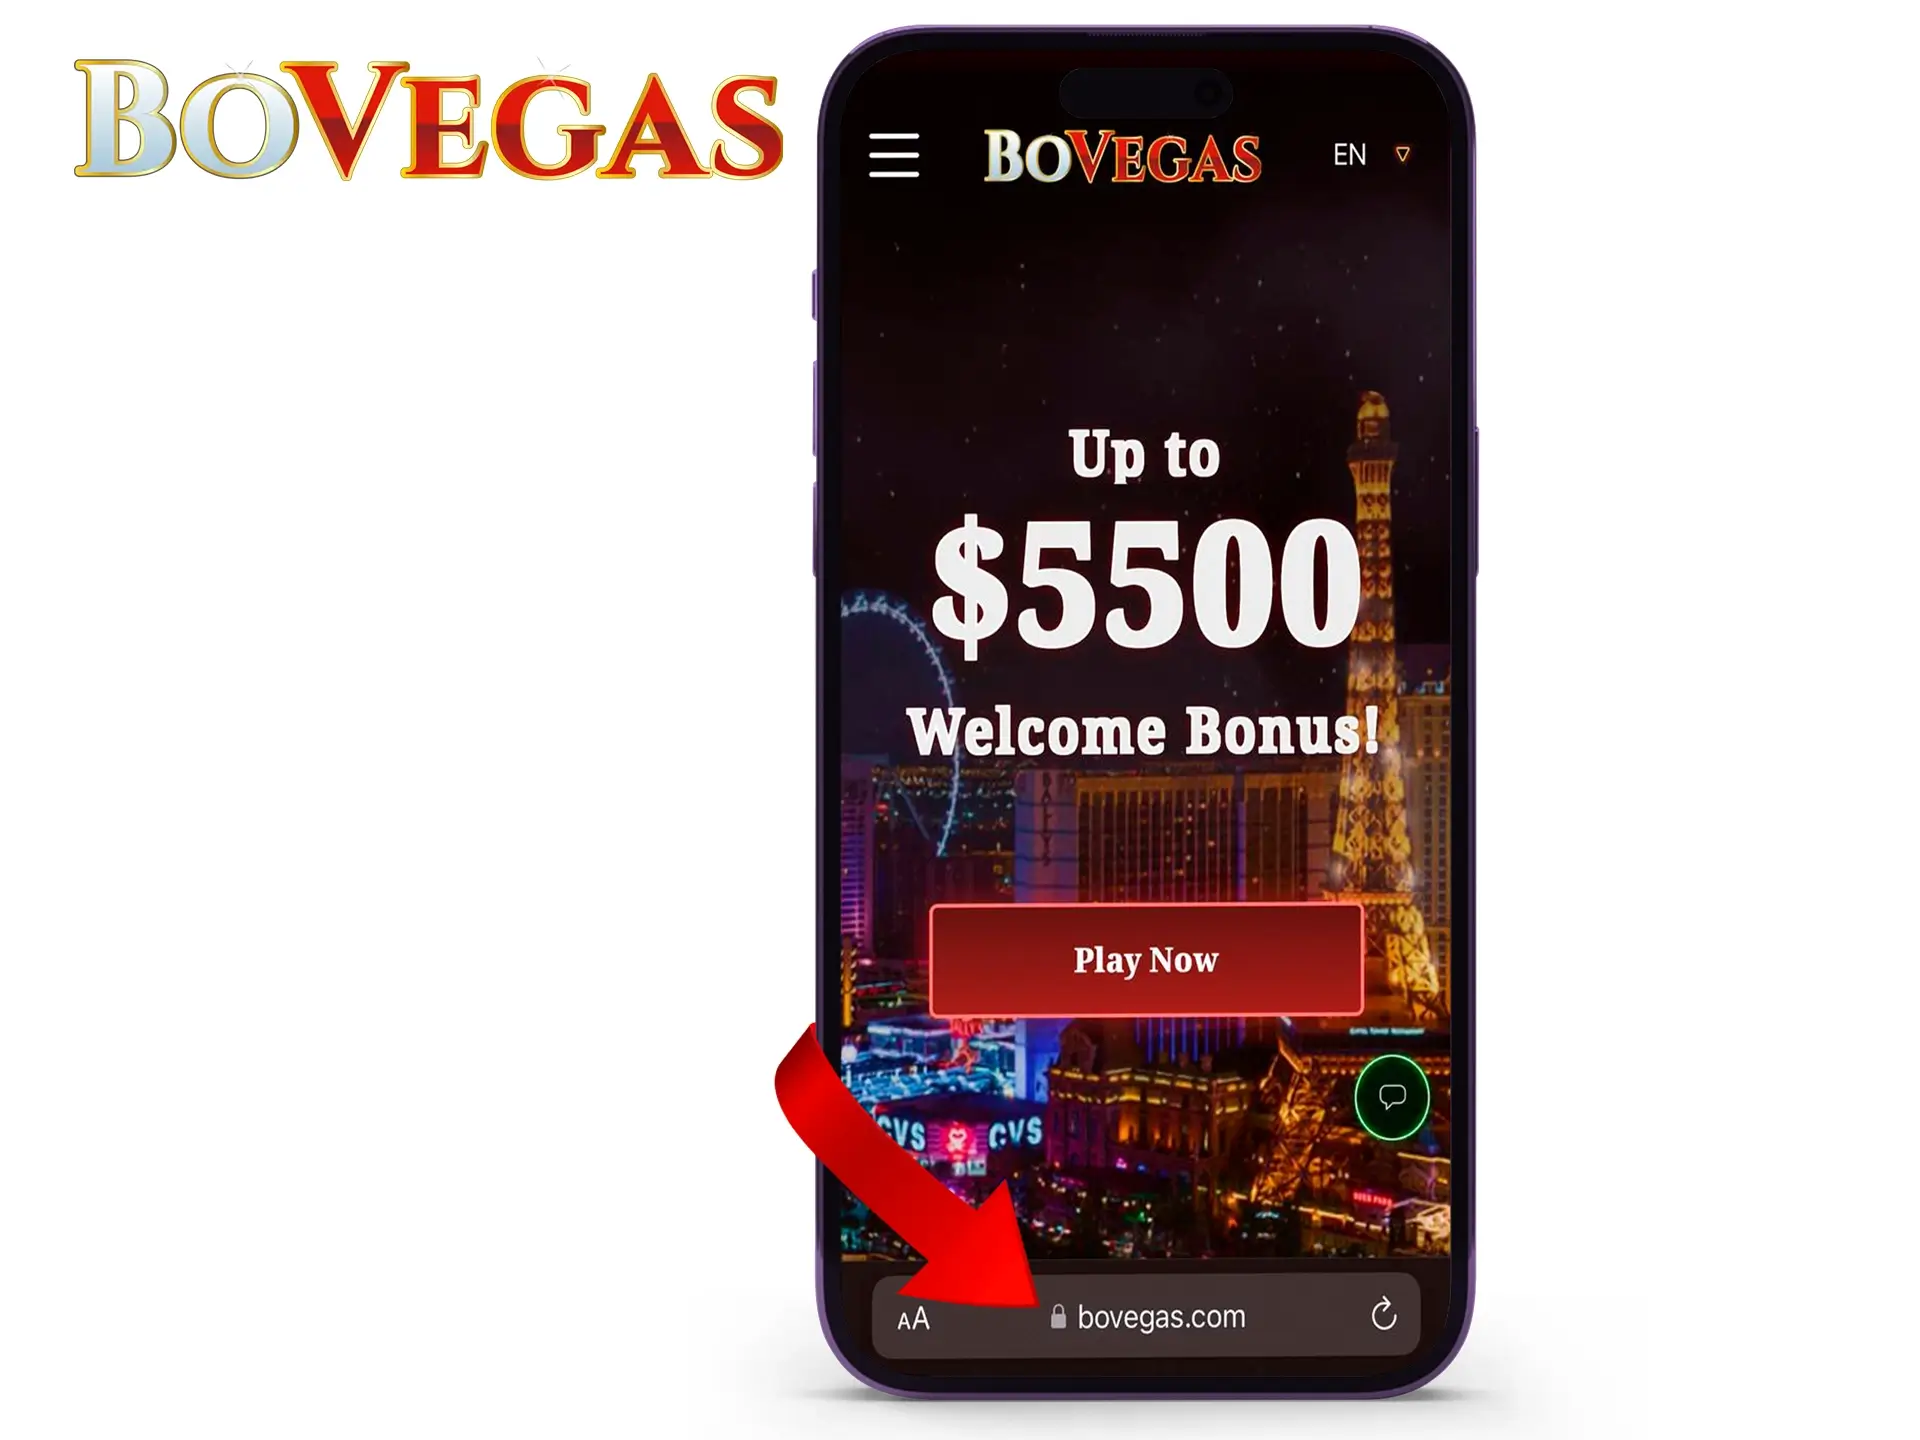 Enter the BoVegas URL on your browser on the iPhone or iPad device.